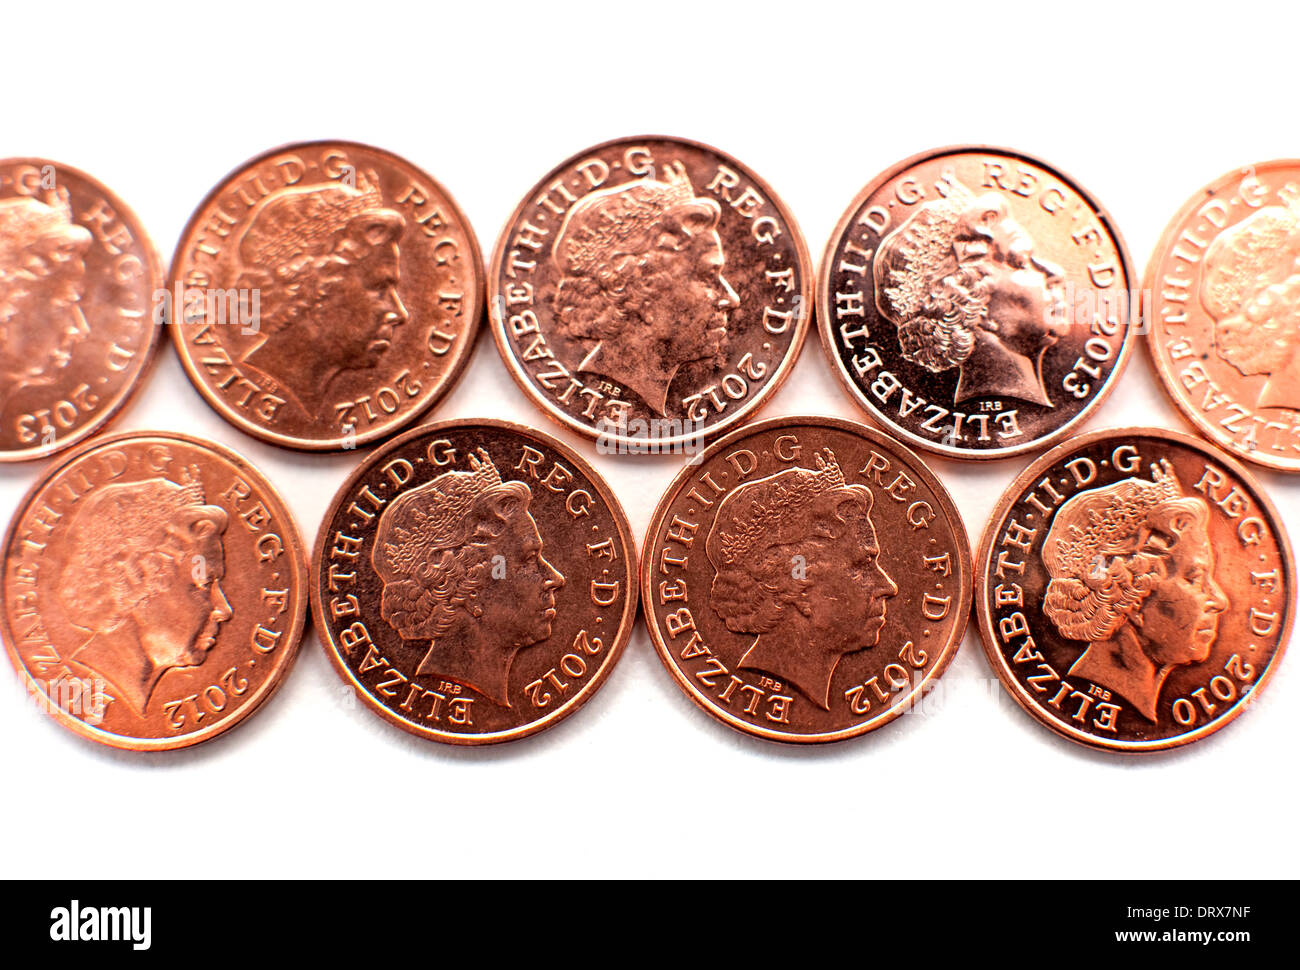 One penny coins, London Stock Photo